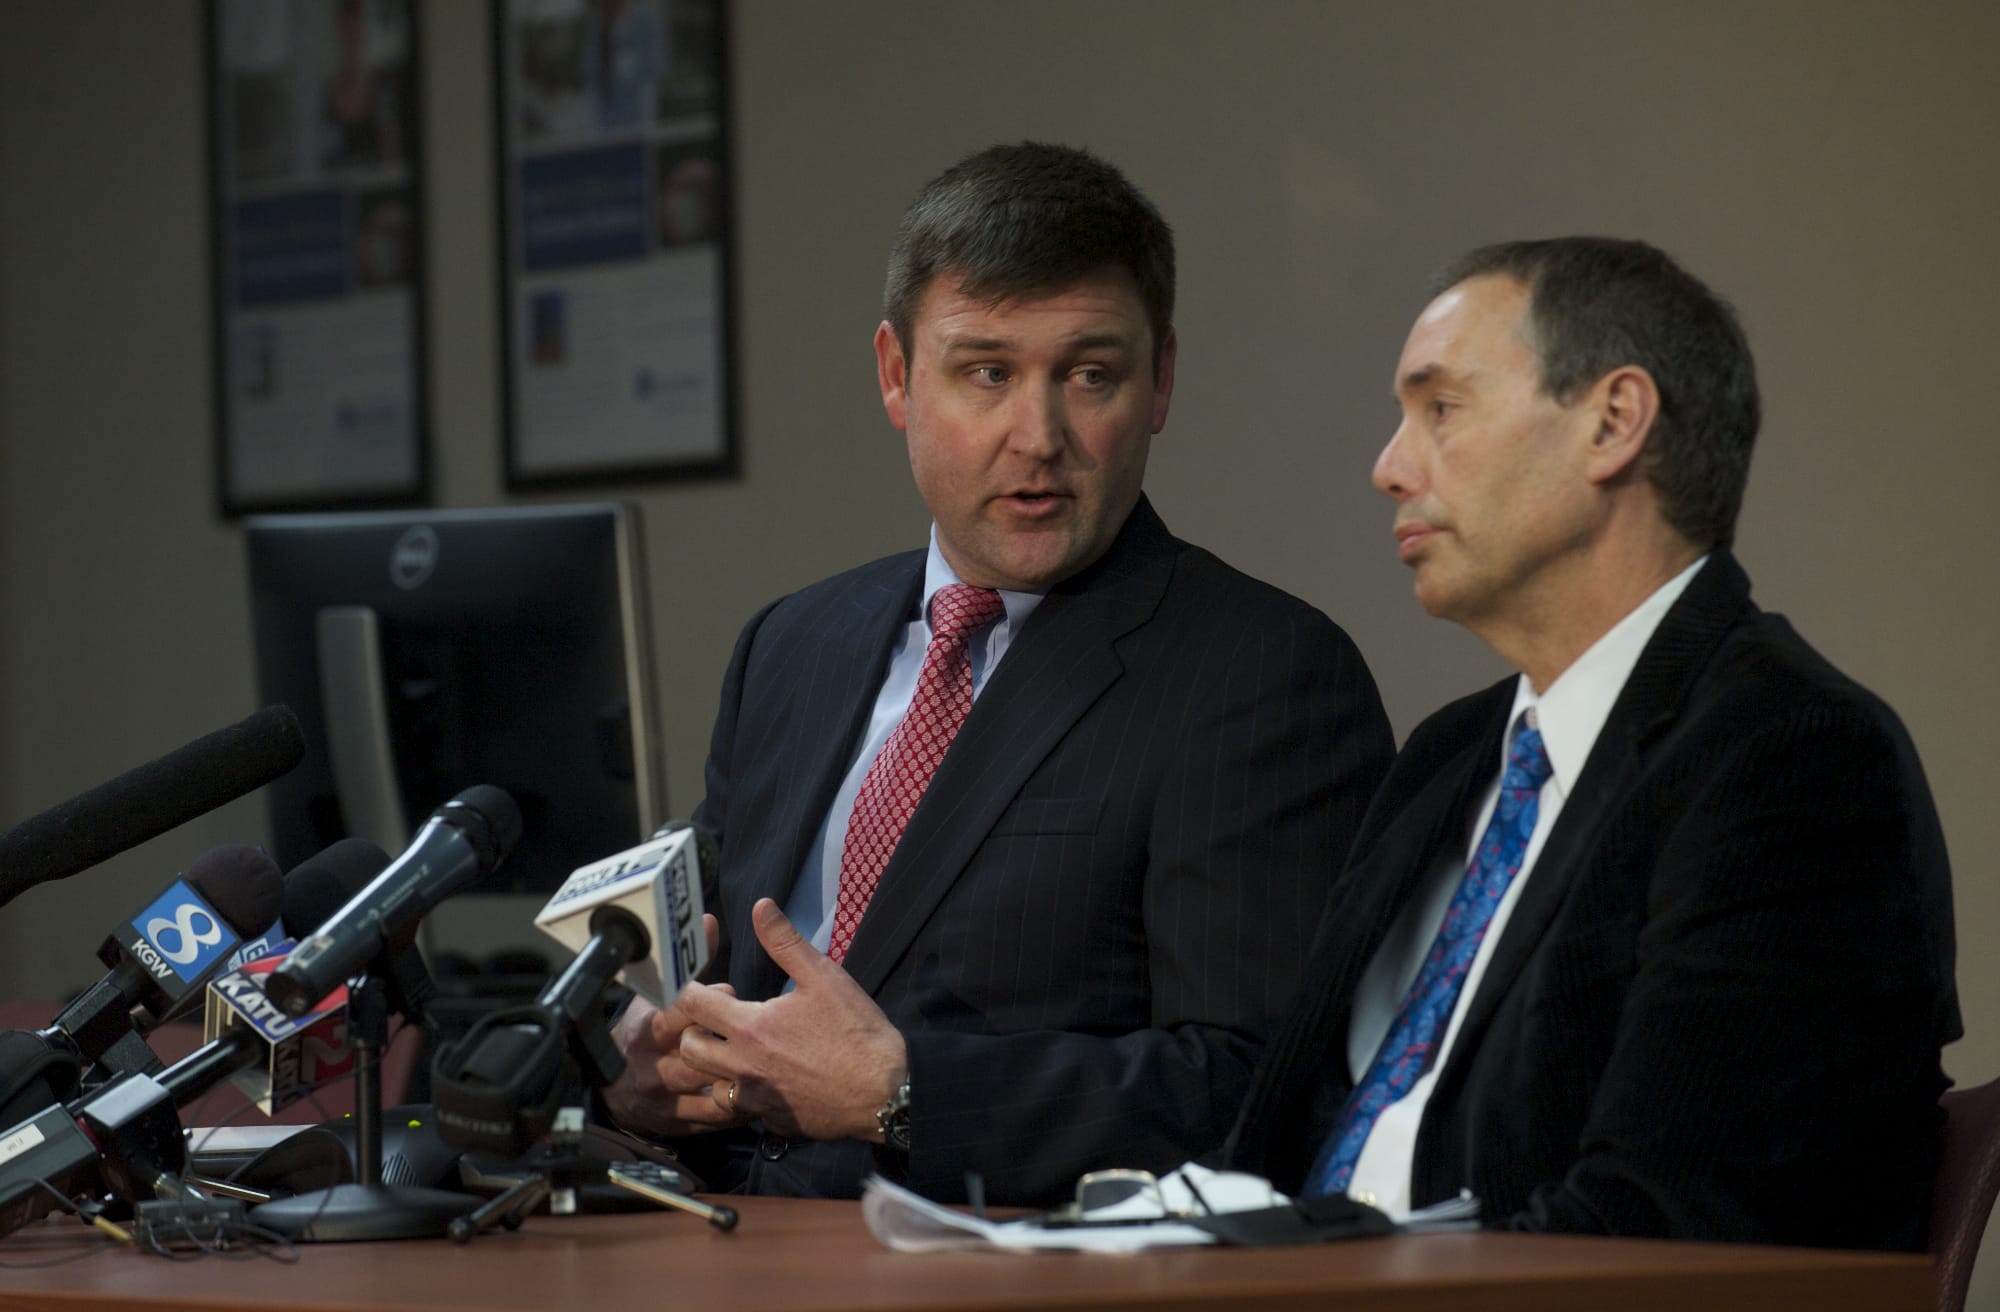 PeaceHealth Columbia Network CEO Sy Johnson, left, and Dr. Alan Melnick, Clark County Public Health director, discuss on Monday an investigation into whether a former employee exposed patients to hepatitis C.